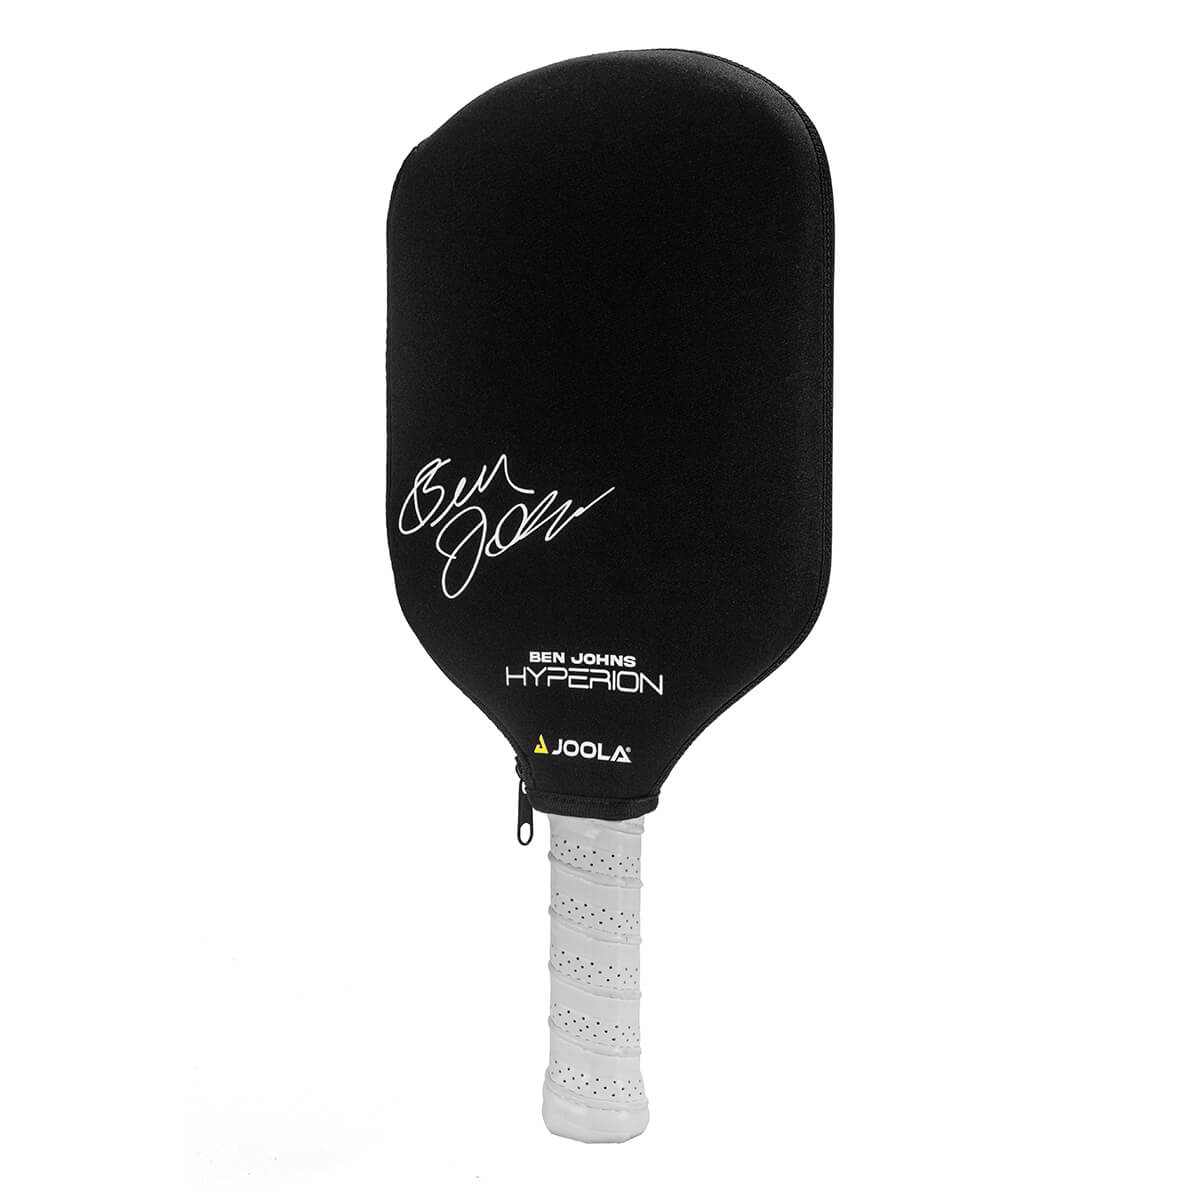 A black JOOLA Elongated Neoprene Sleeve Pickleball Paddle Cover with a signature on it.